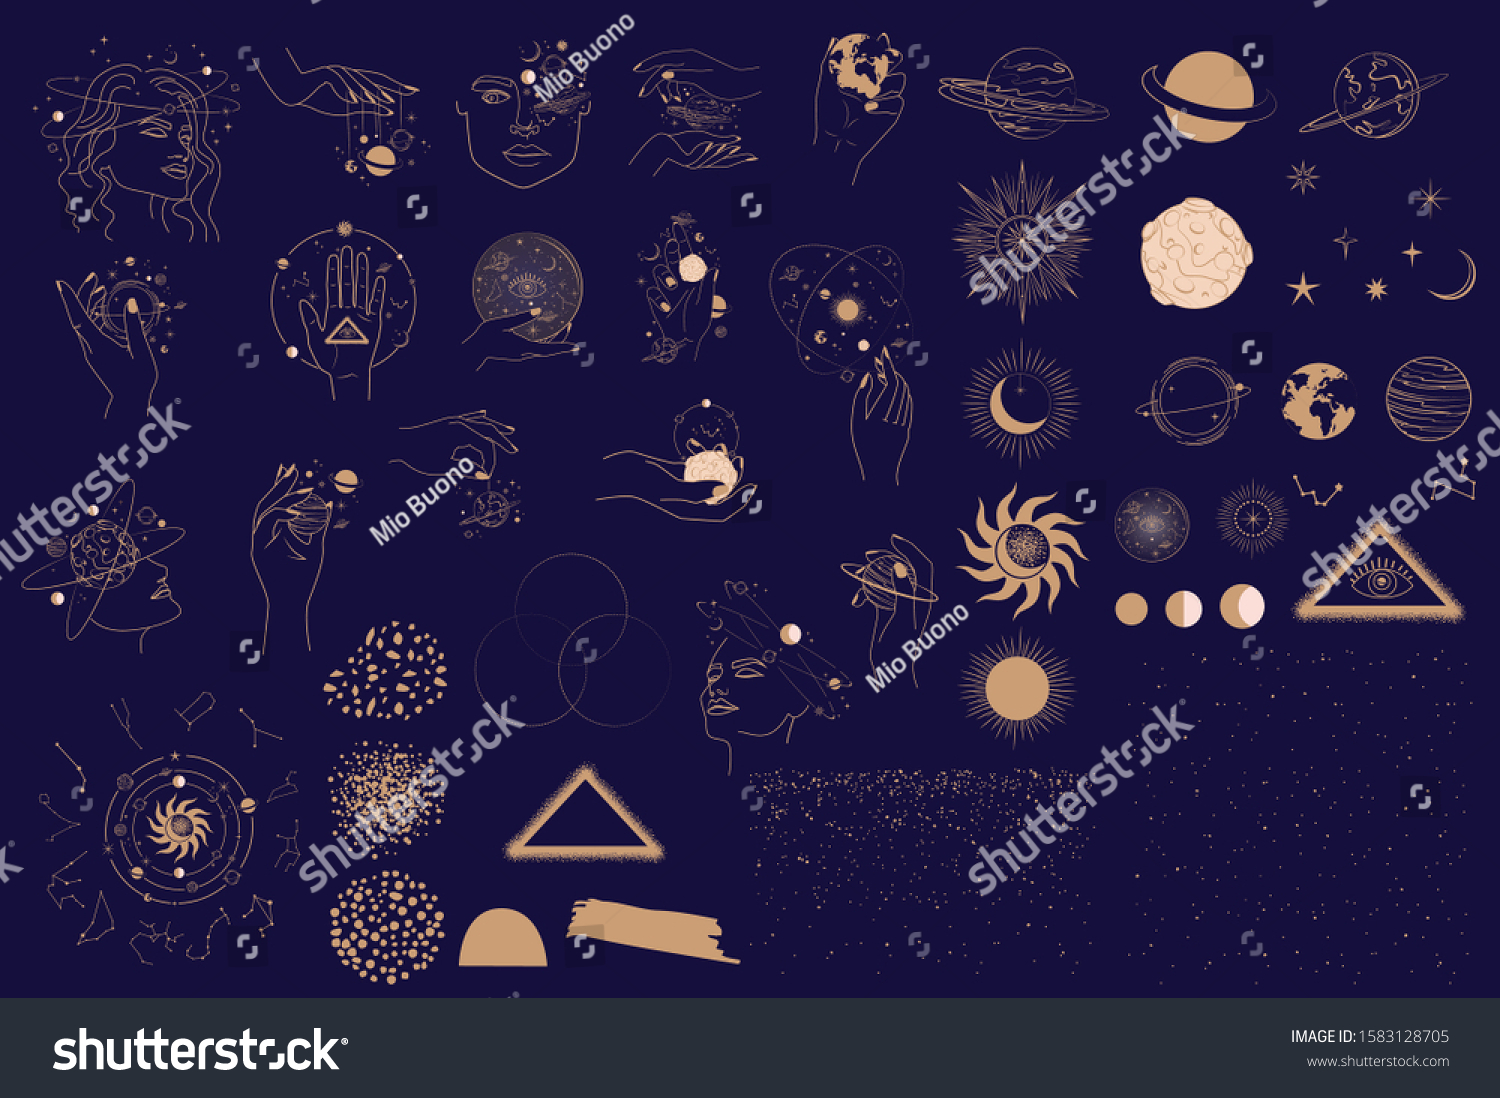 Collection of Mystical and Astrology objects, Woman face, Space objects, planet, constellation, magic ball, human hands. Minimalistic objects made in the style of one line. Editable vector illustratio #1583128705